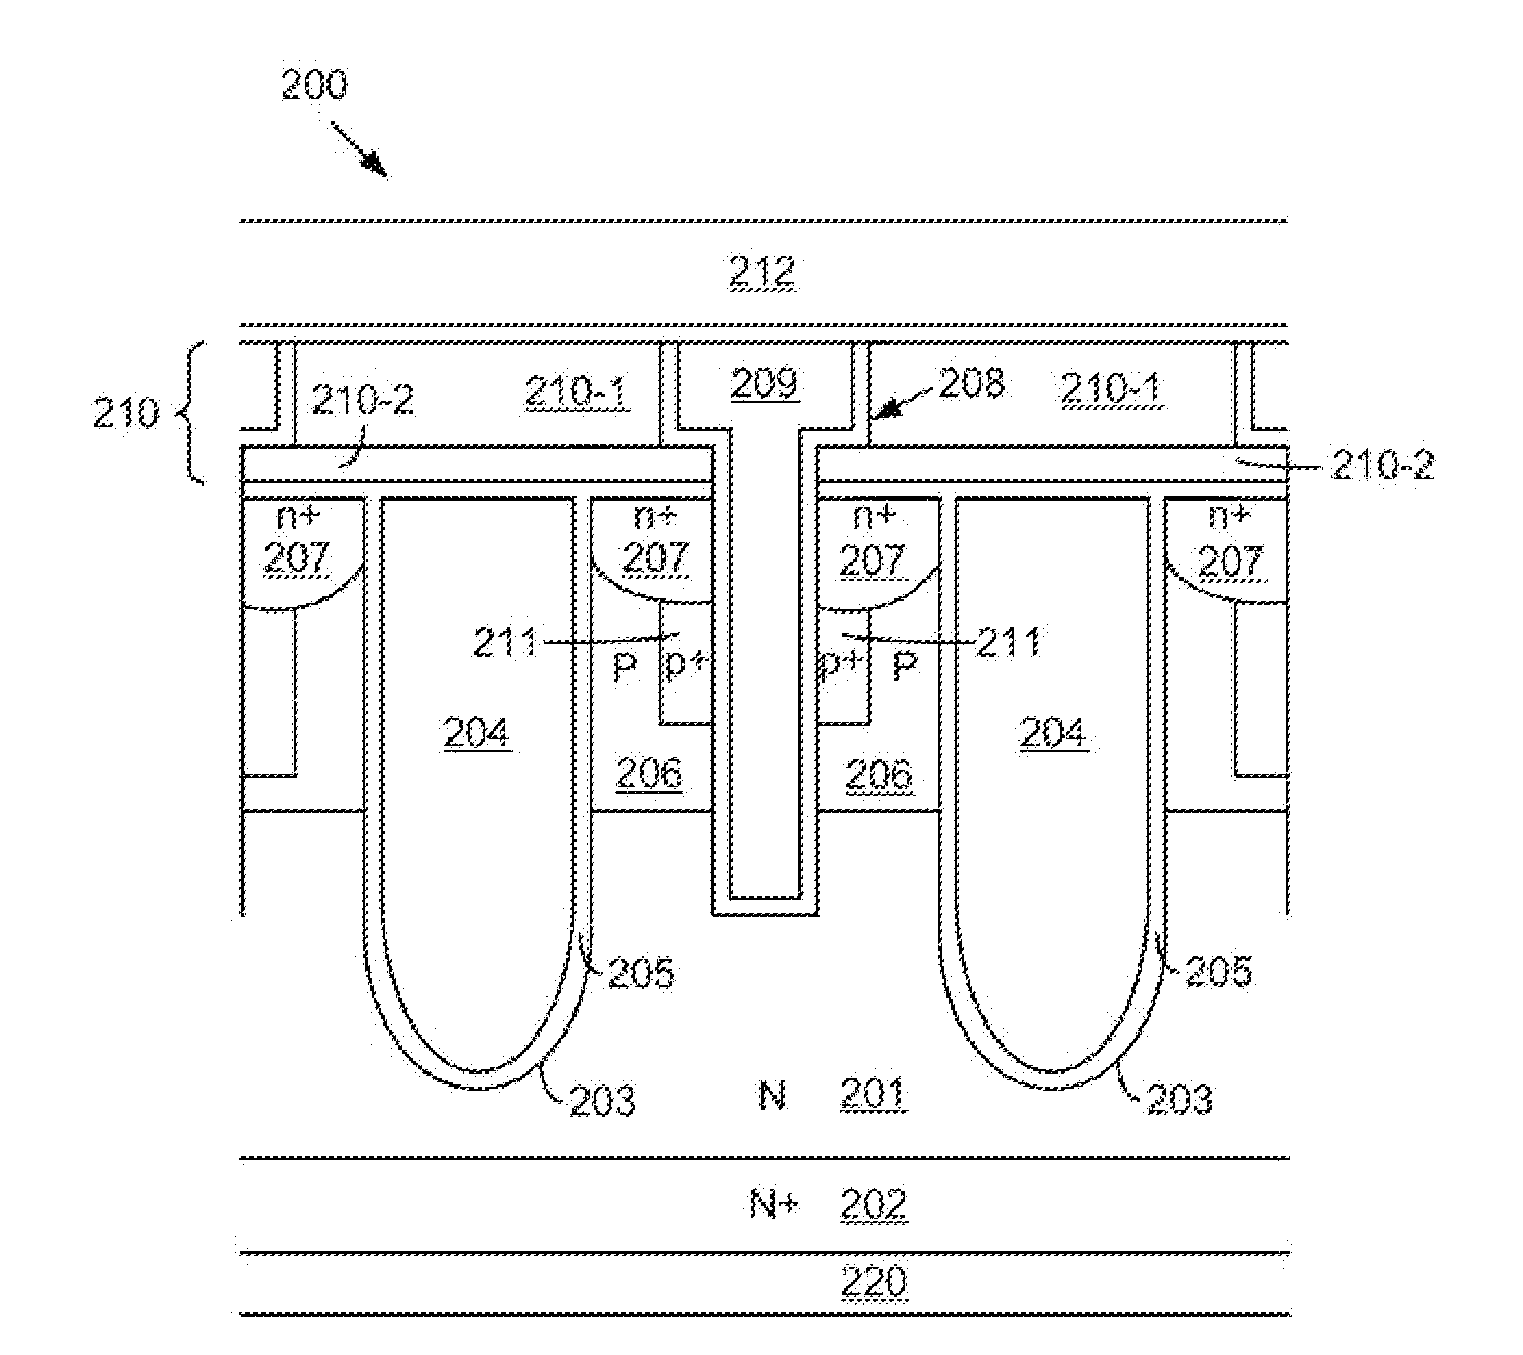 Trench metal oxide semiconductor field effect transistor with embedded schottky rectifier using reduced masks process